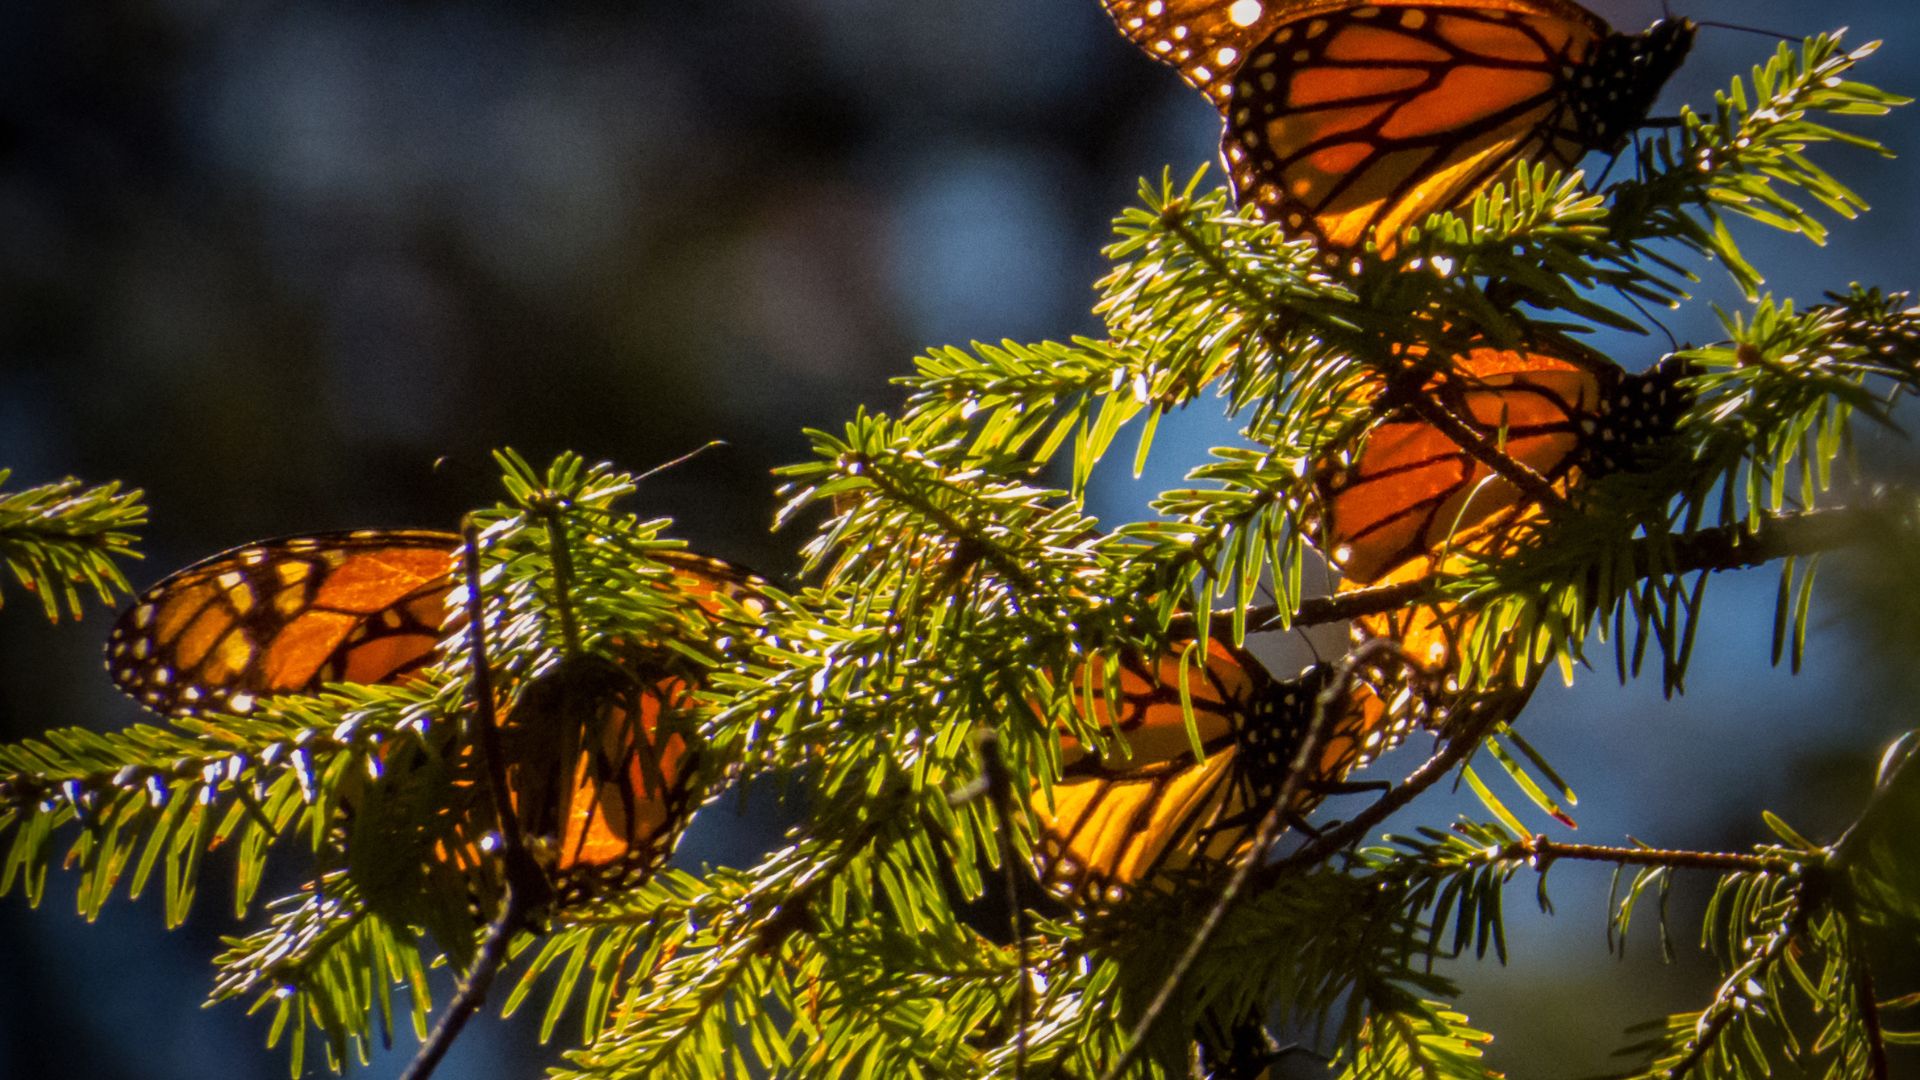 Photograph of monarch butterflies clustering on a tree branch.